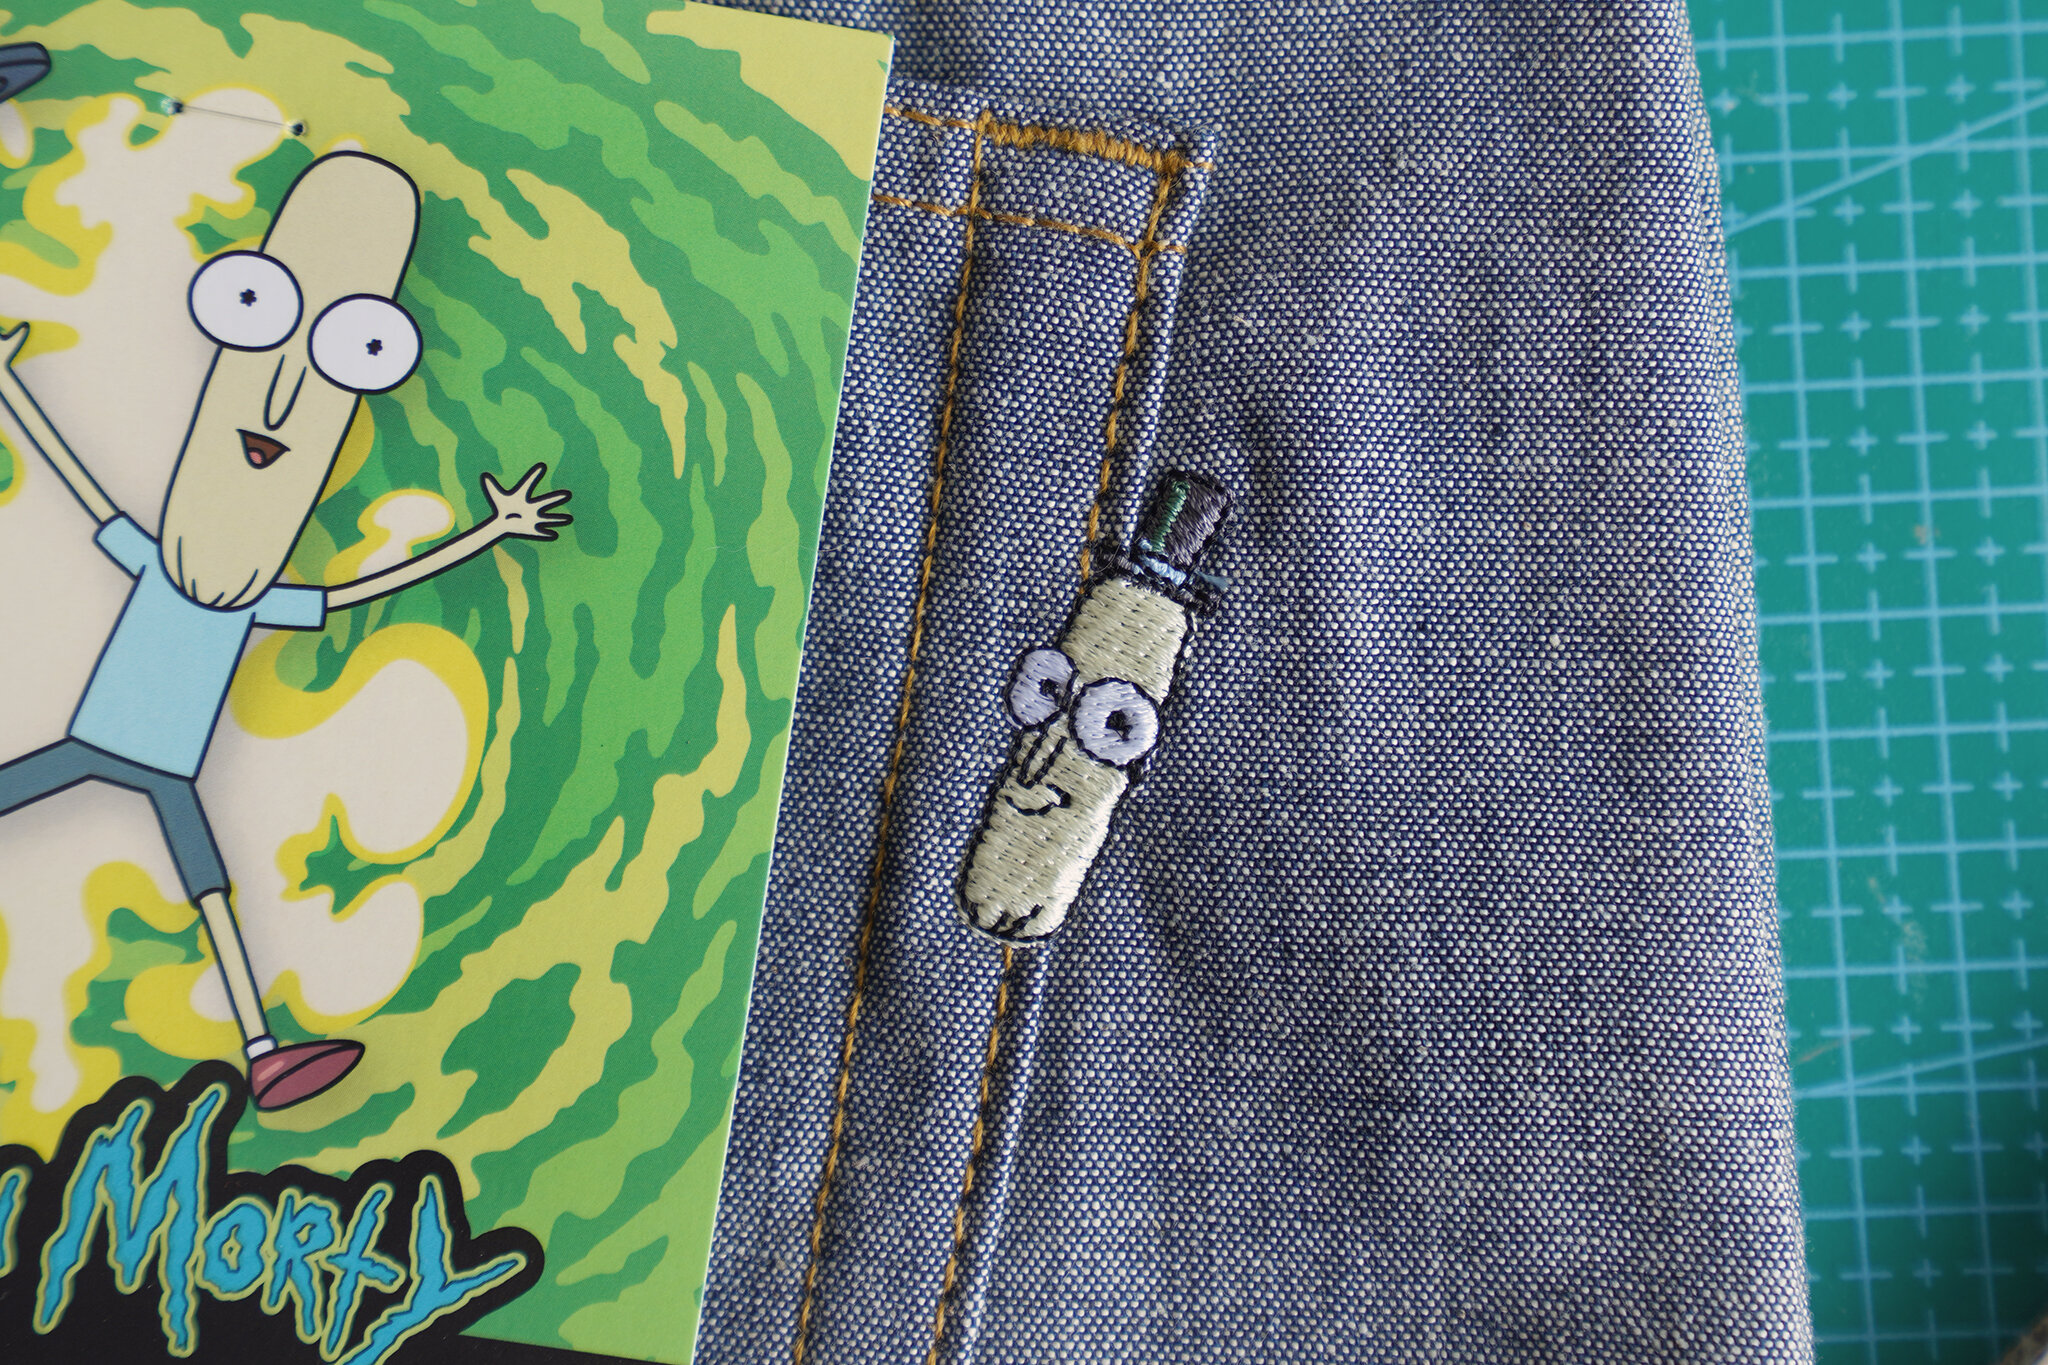 Mr. Poopy Butthole "Ohh Wee" Selvedge - Embroidery 